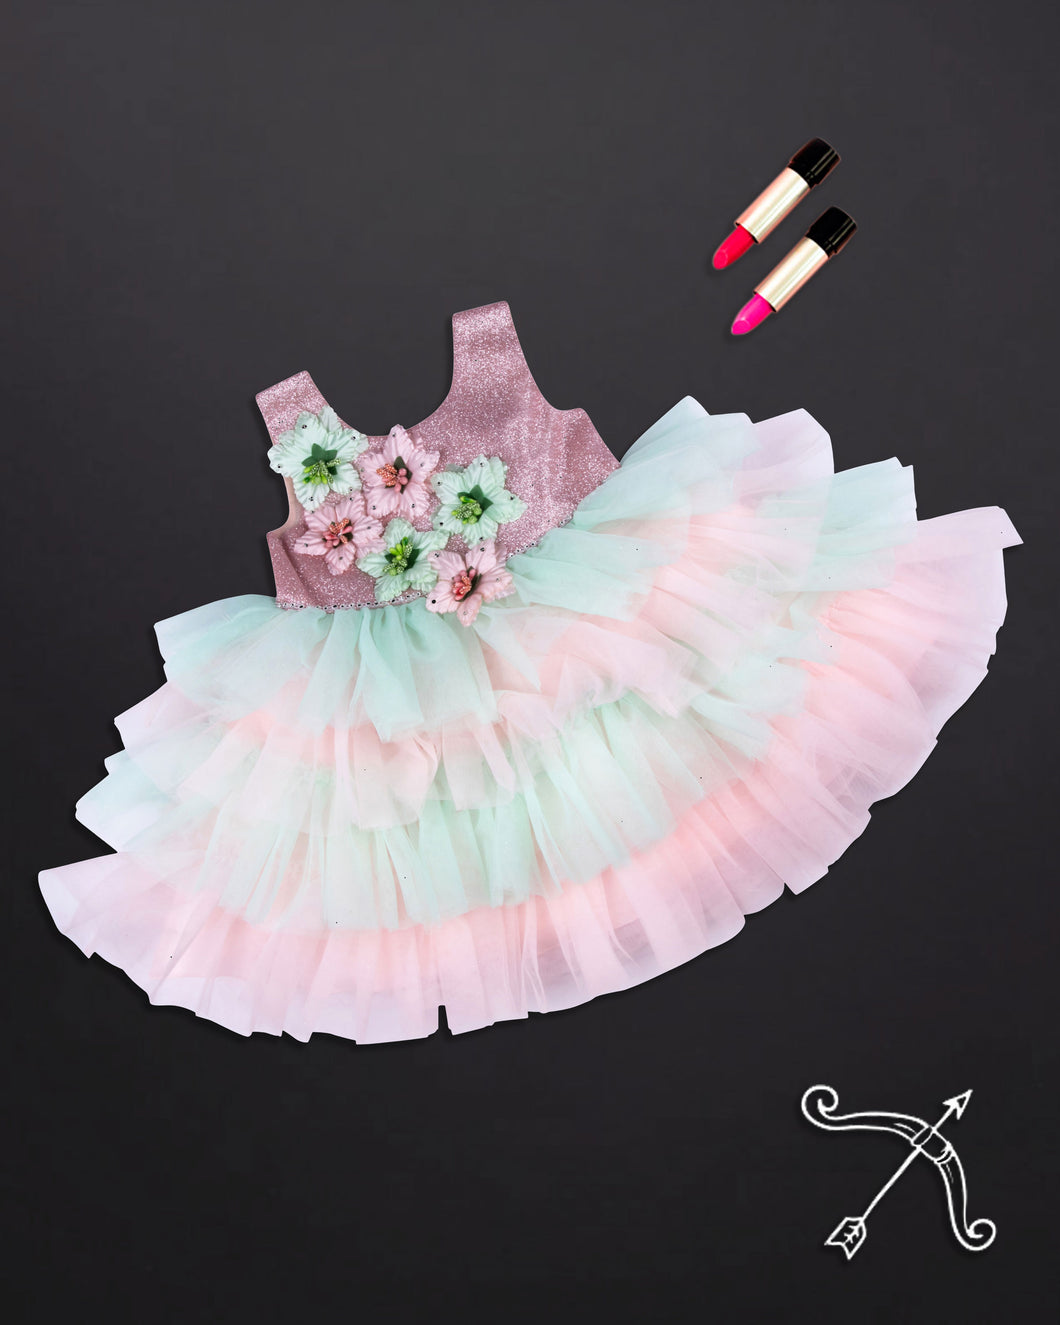 Girls Embellished Flared Peach Party Frock